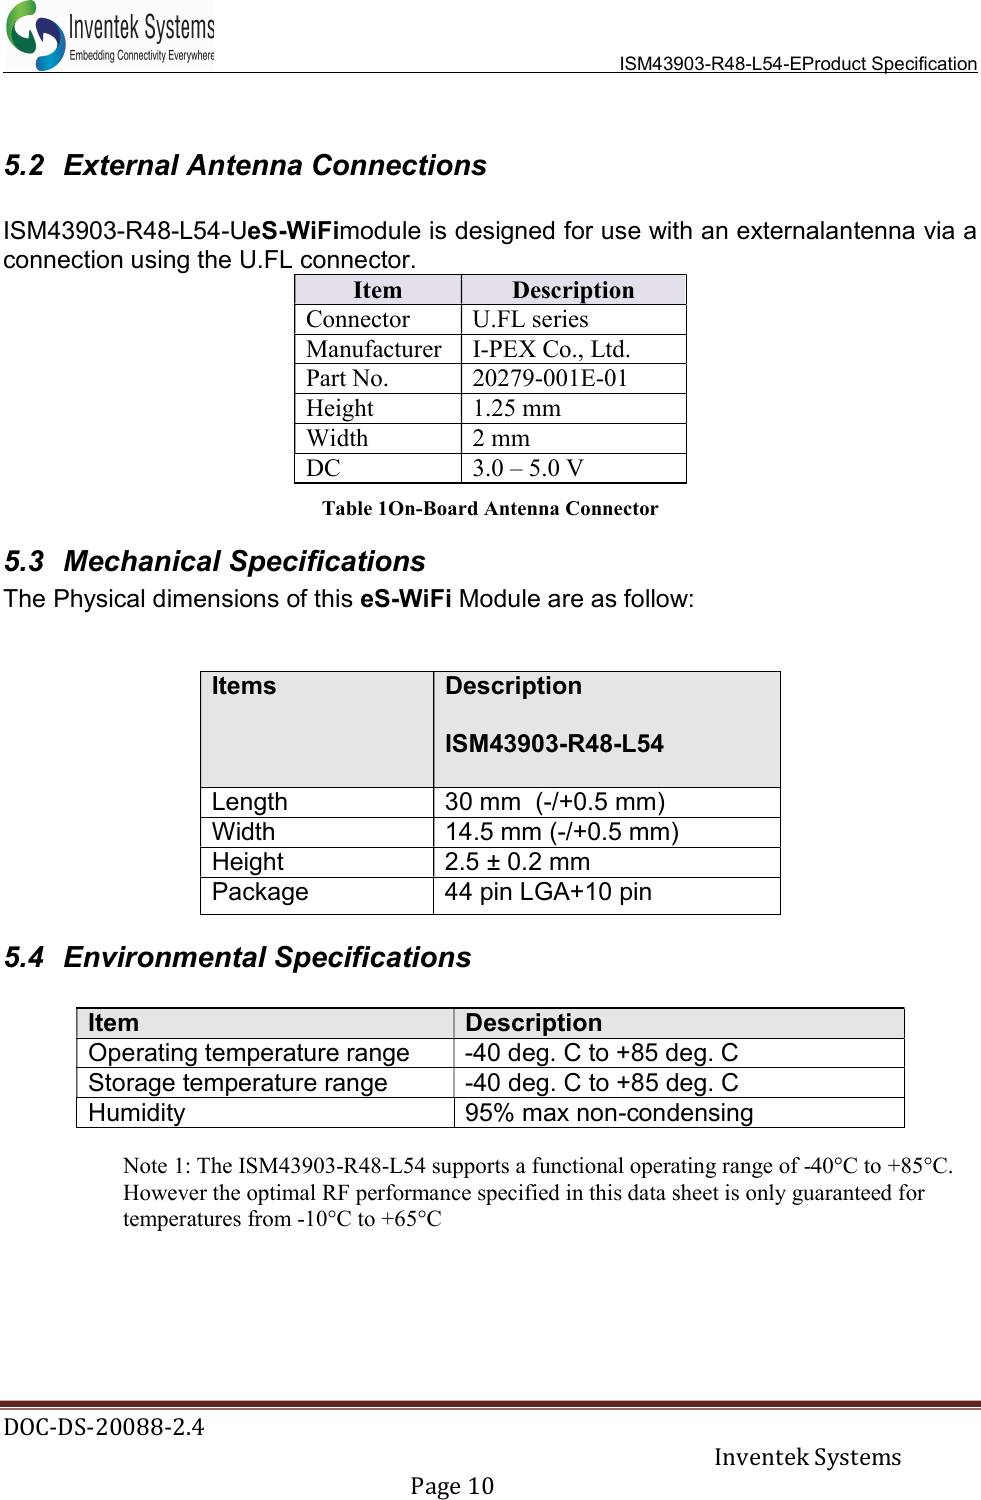   ISM43903-R48-L54-EProduct Specification DOC-DS-20088-2.4     Inventek Systems   Page 10   5.2  External Antenna Connections  ISM43903-R48-L54-UeS-WiFimodule is designed for use with an externalantenna via a connection using the U.FL connector. Item  Description Connector  U.FL series Manufacturer  I-PEX Co., Ltd. Part No.  20279-001E-01 Height  1.25 mm Width  2 mm DC  3.0 – 5.0 V Table 1On-Board Antenna Connector 5.3  Mechanical Specifications The Physical dimensions of this eS-WiFi Module are as follow:   Items Description  ISM43903-R48-L54  Length  30 mm  (-/+0.5 mm) Width  14.5 mm (-/+0.5 mm)  Height  2.5 ± 0.2 mm  Package  44 pin LGA+10 pin  5.4  Environmental Specifications  Item Description Operating temperature range  -40 deg. C to +85 deg. C Storage temperature range  -40 deg. C to +85 deg. C Humidity  95% max non-condensing  Note 1: The ISM43903-R48-L54 supports a functional operating range of -40°C to +85°C. However the optimal RF performance specified in this data sheet is only guaranteed for temperatures from -10°C to +65°C       